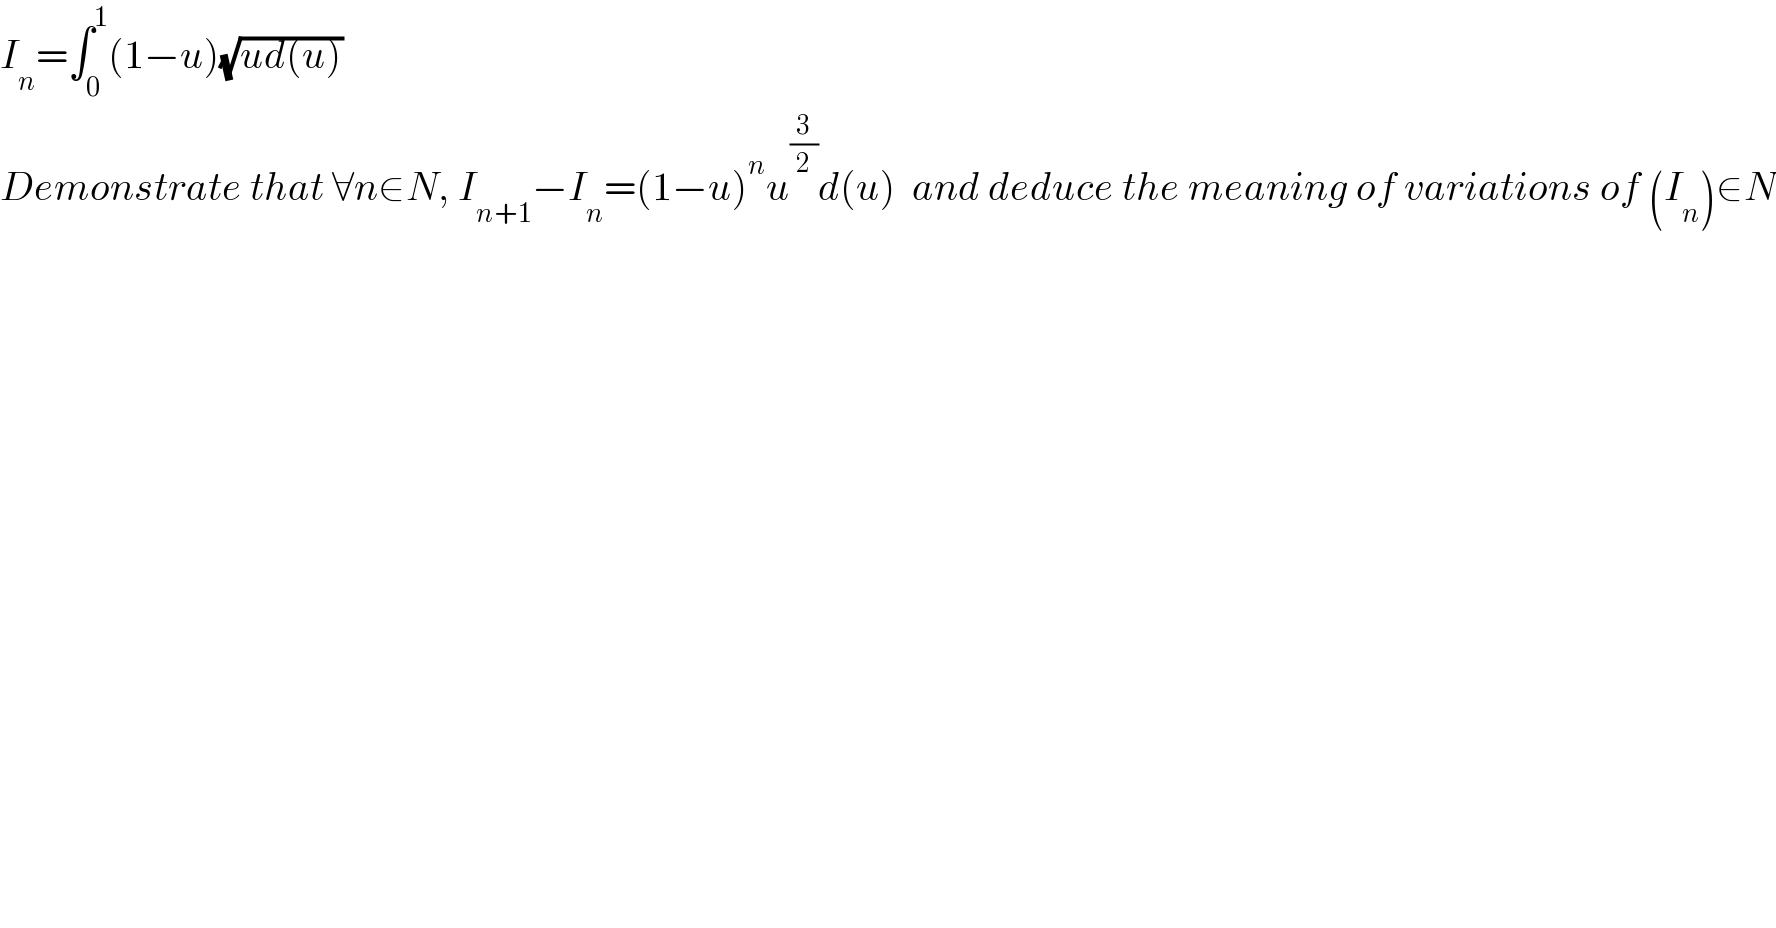 I_n =∫_0 ^1 (1−u)(√(ud(u)))  Demonstrate that ∀n∈N, I_(n+1) −I_n =(1−u)^n u^(3/2) d(u)  and deduce the meaning of variations of (I_n )∈N  